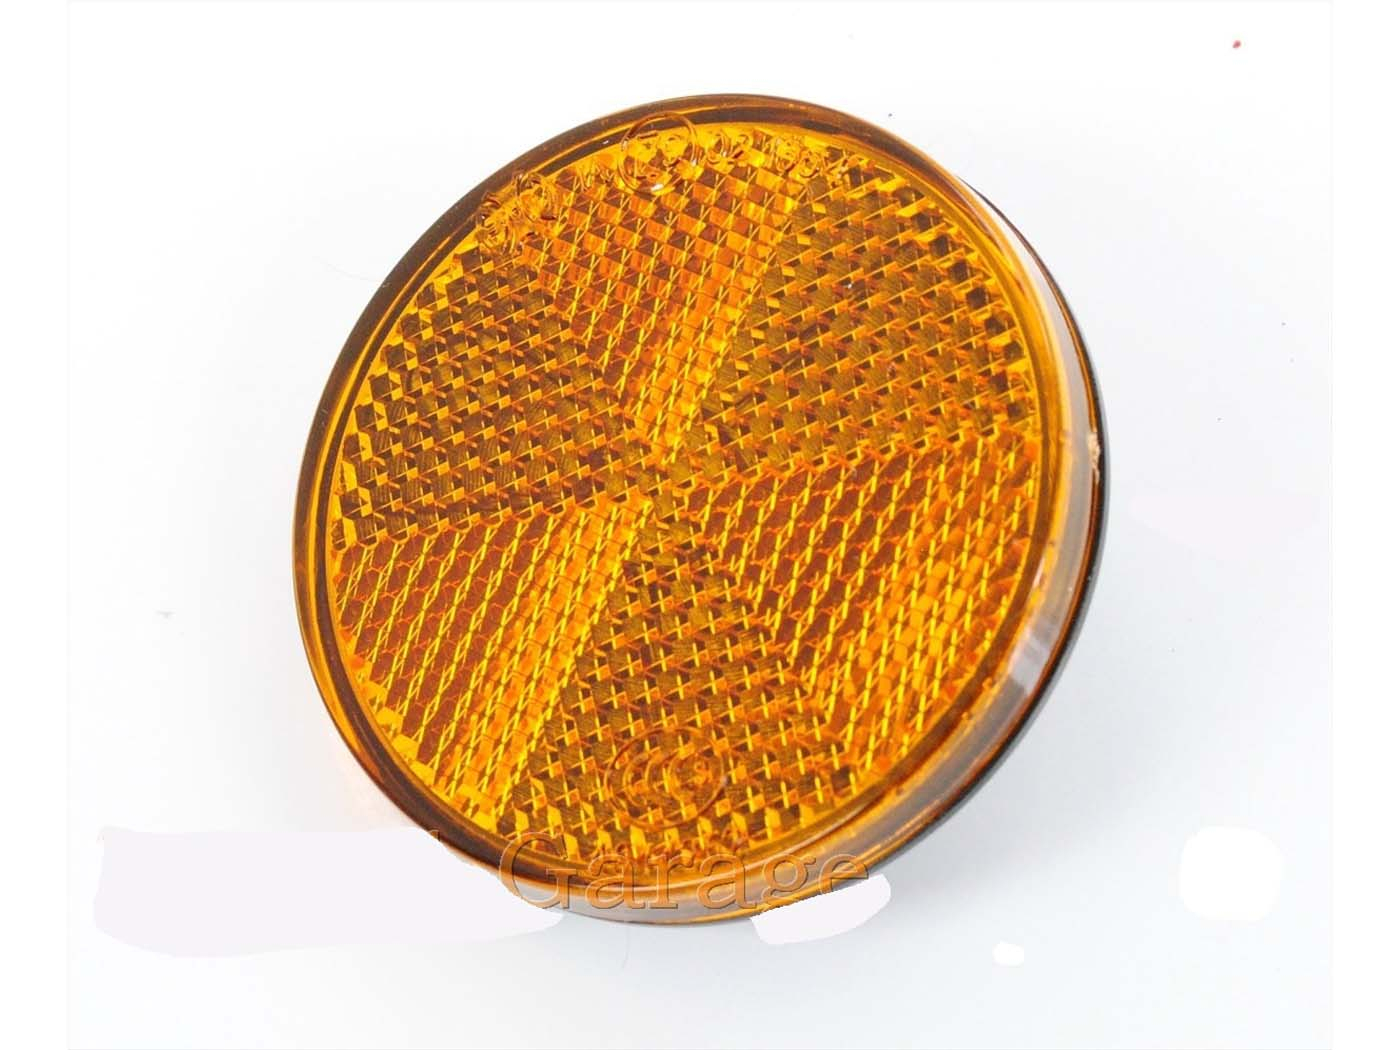 Reflector Universal 55mm 7mm For Moped, Moped, Mokick, Scooter